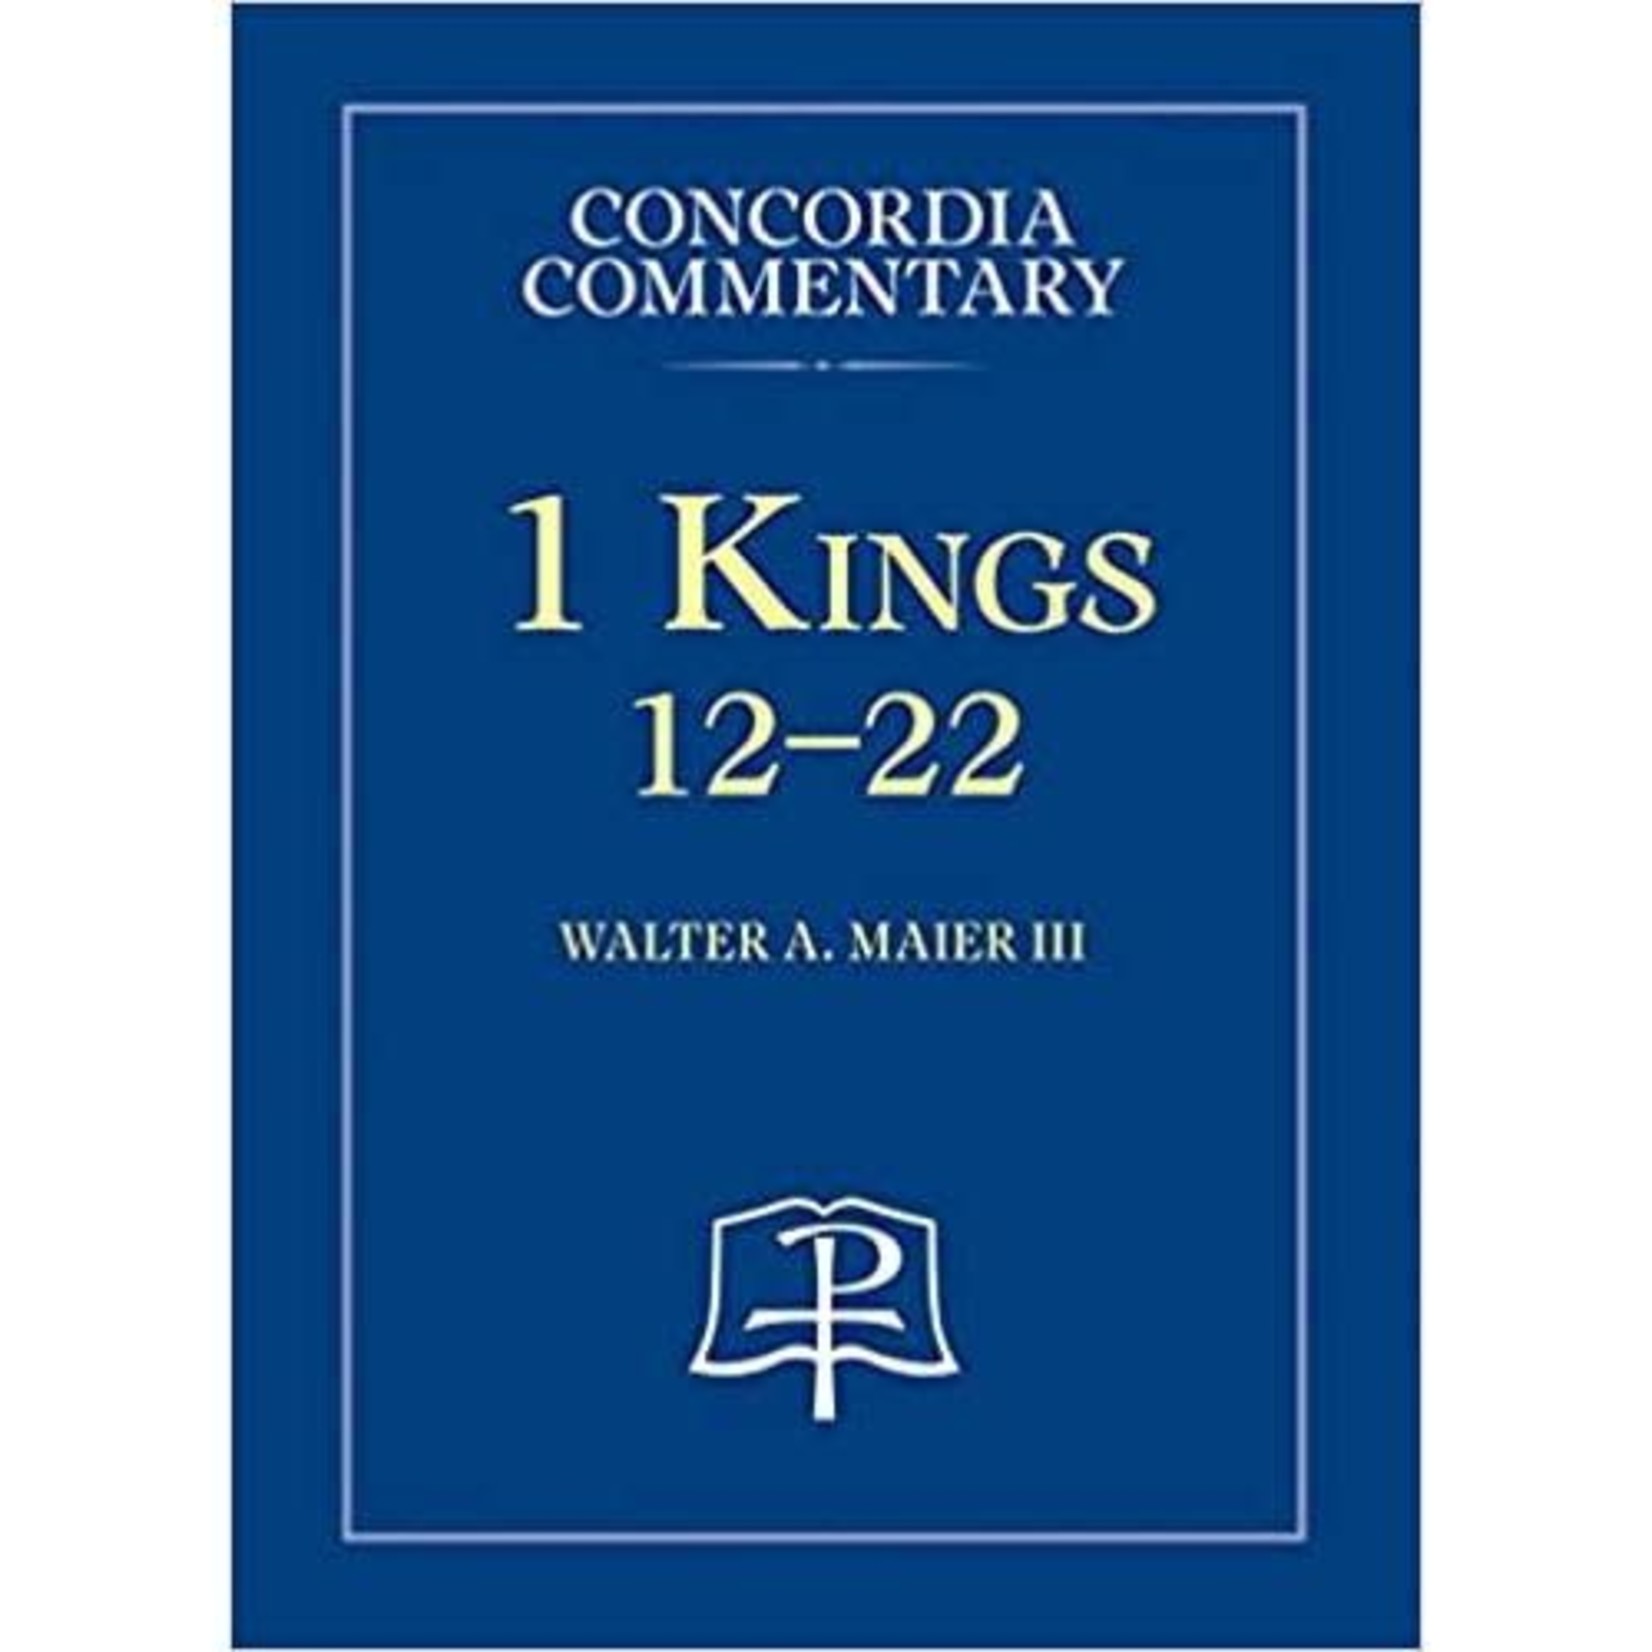 Concordia Commentary - 1 Kings 12-22